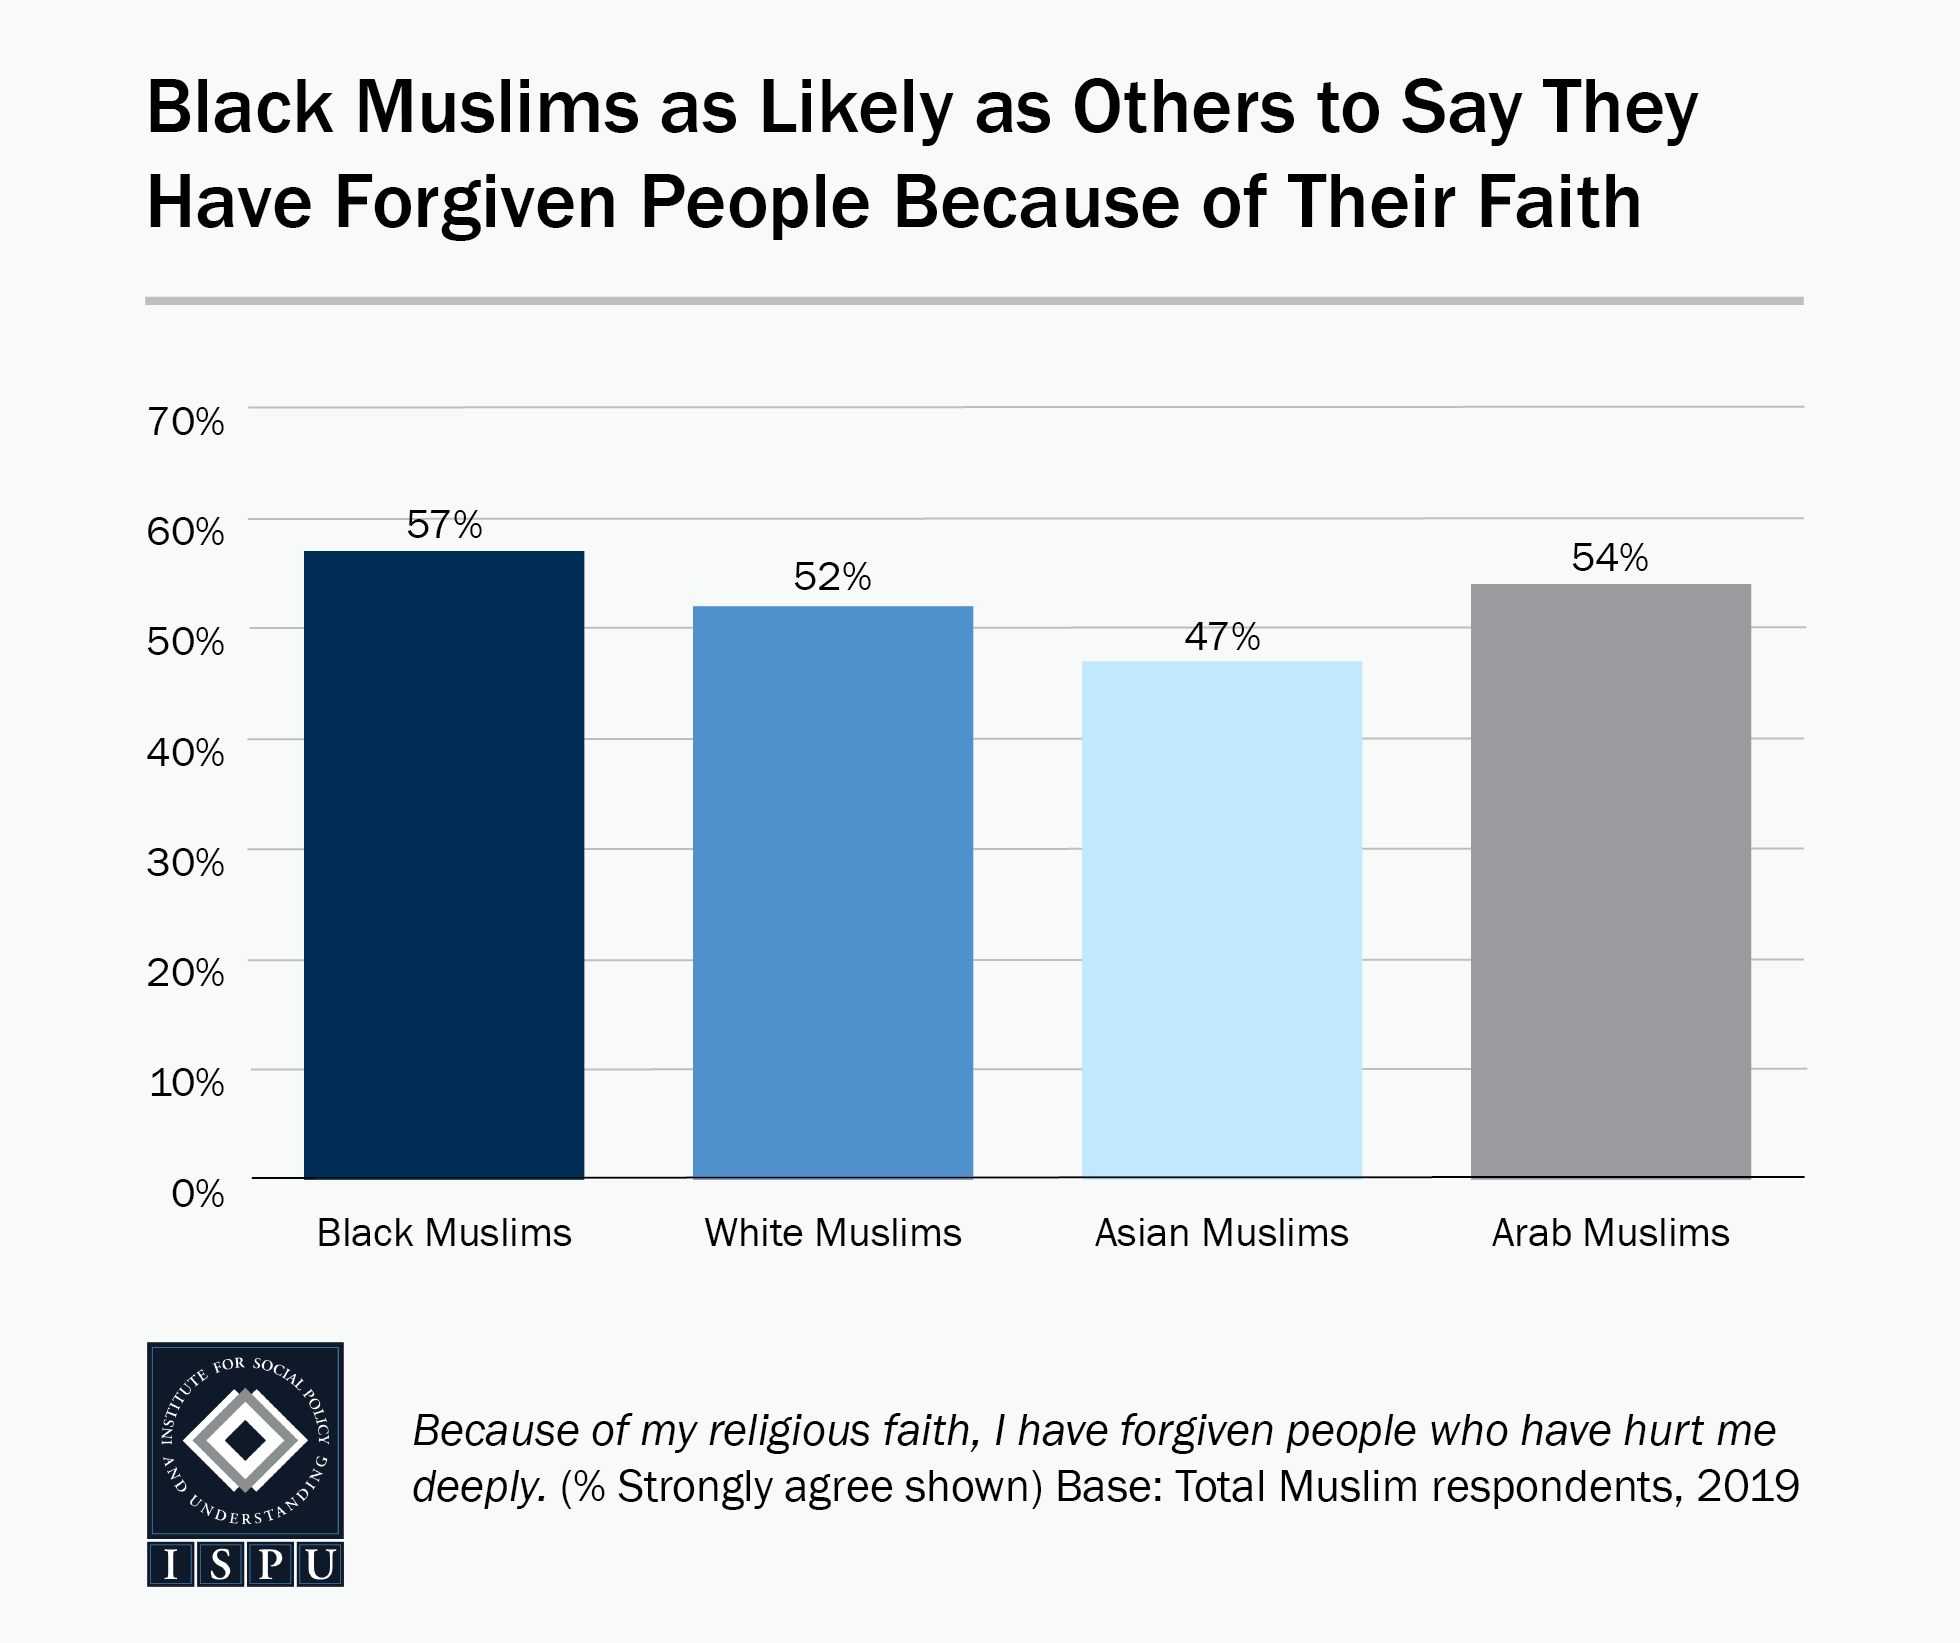 Bar graph showing that Black Muslims (57%) are as likely as others (47%-54%) to say they have forgiven people because of their faith